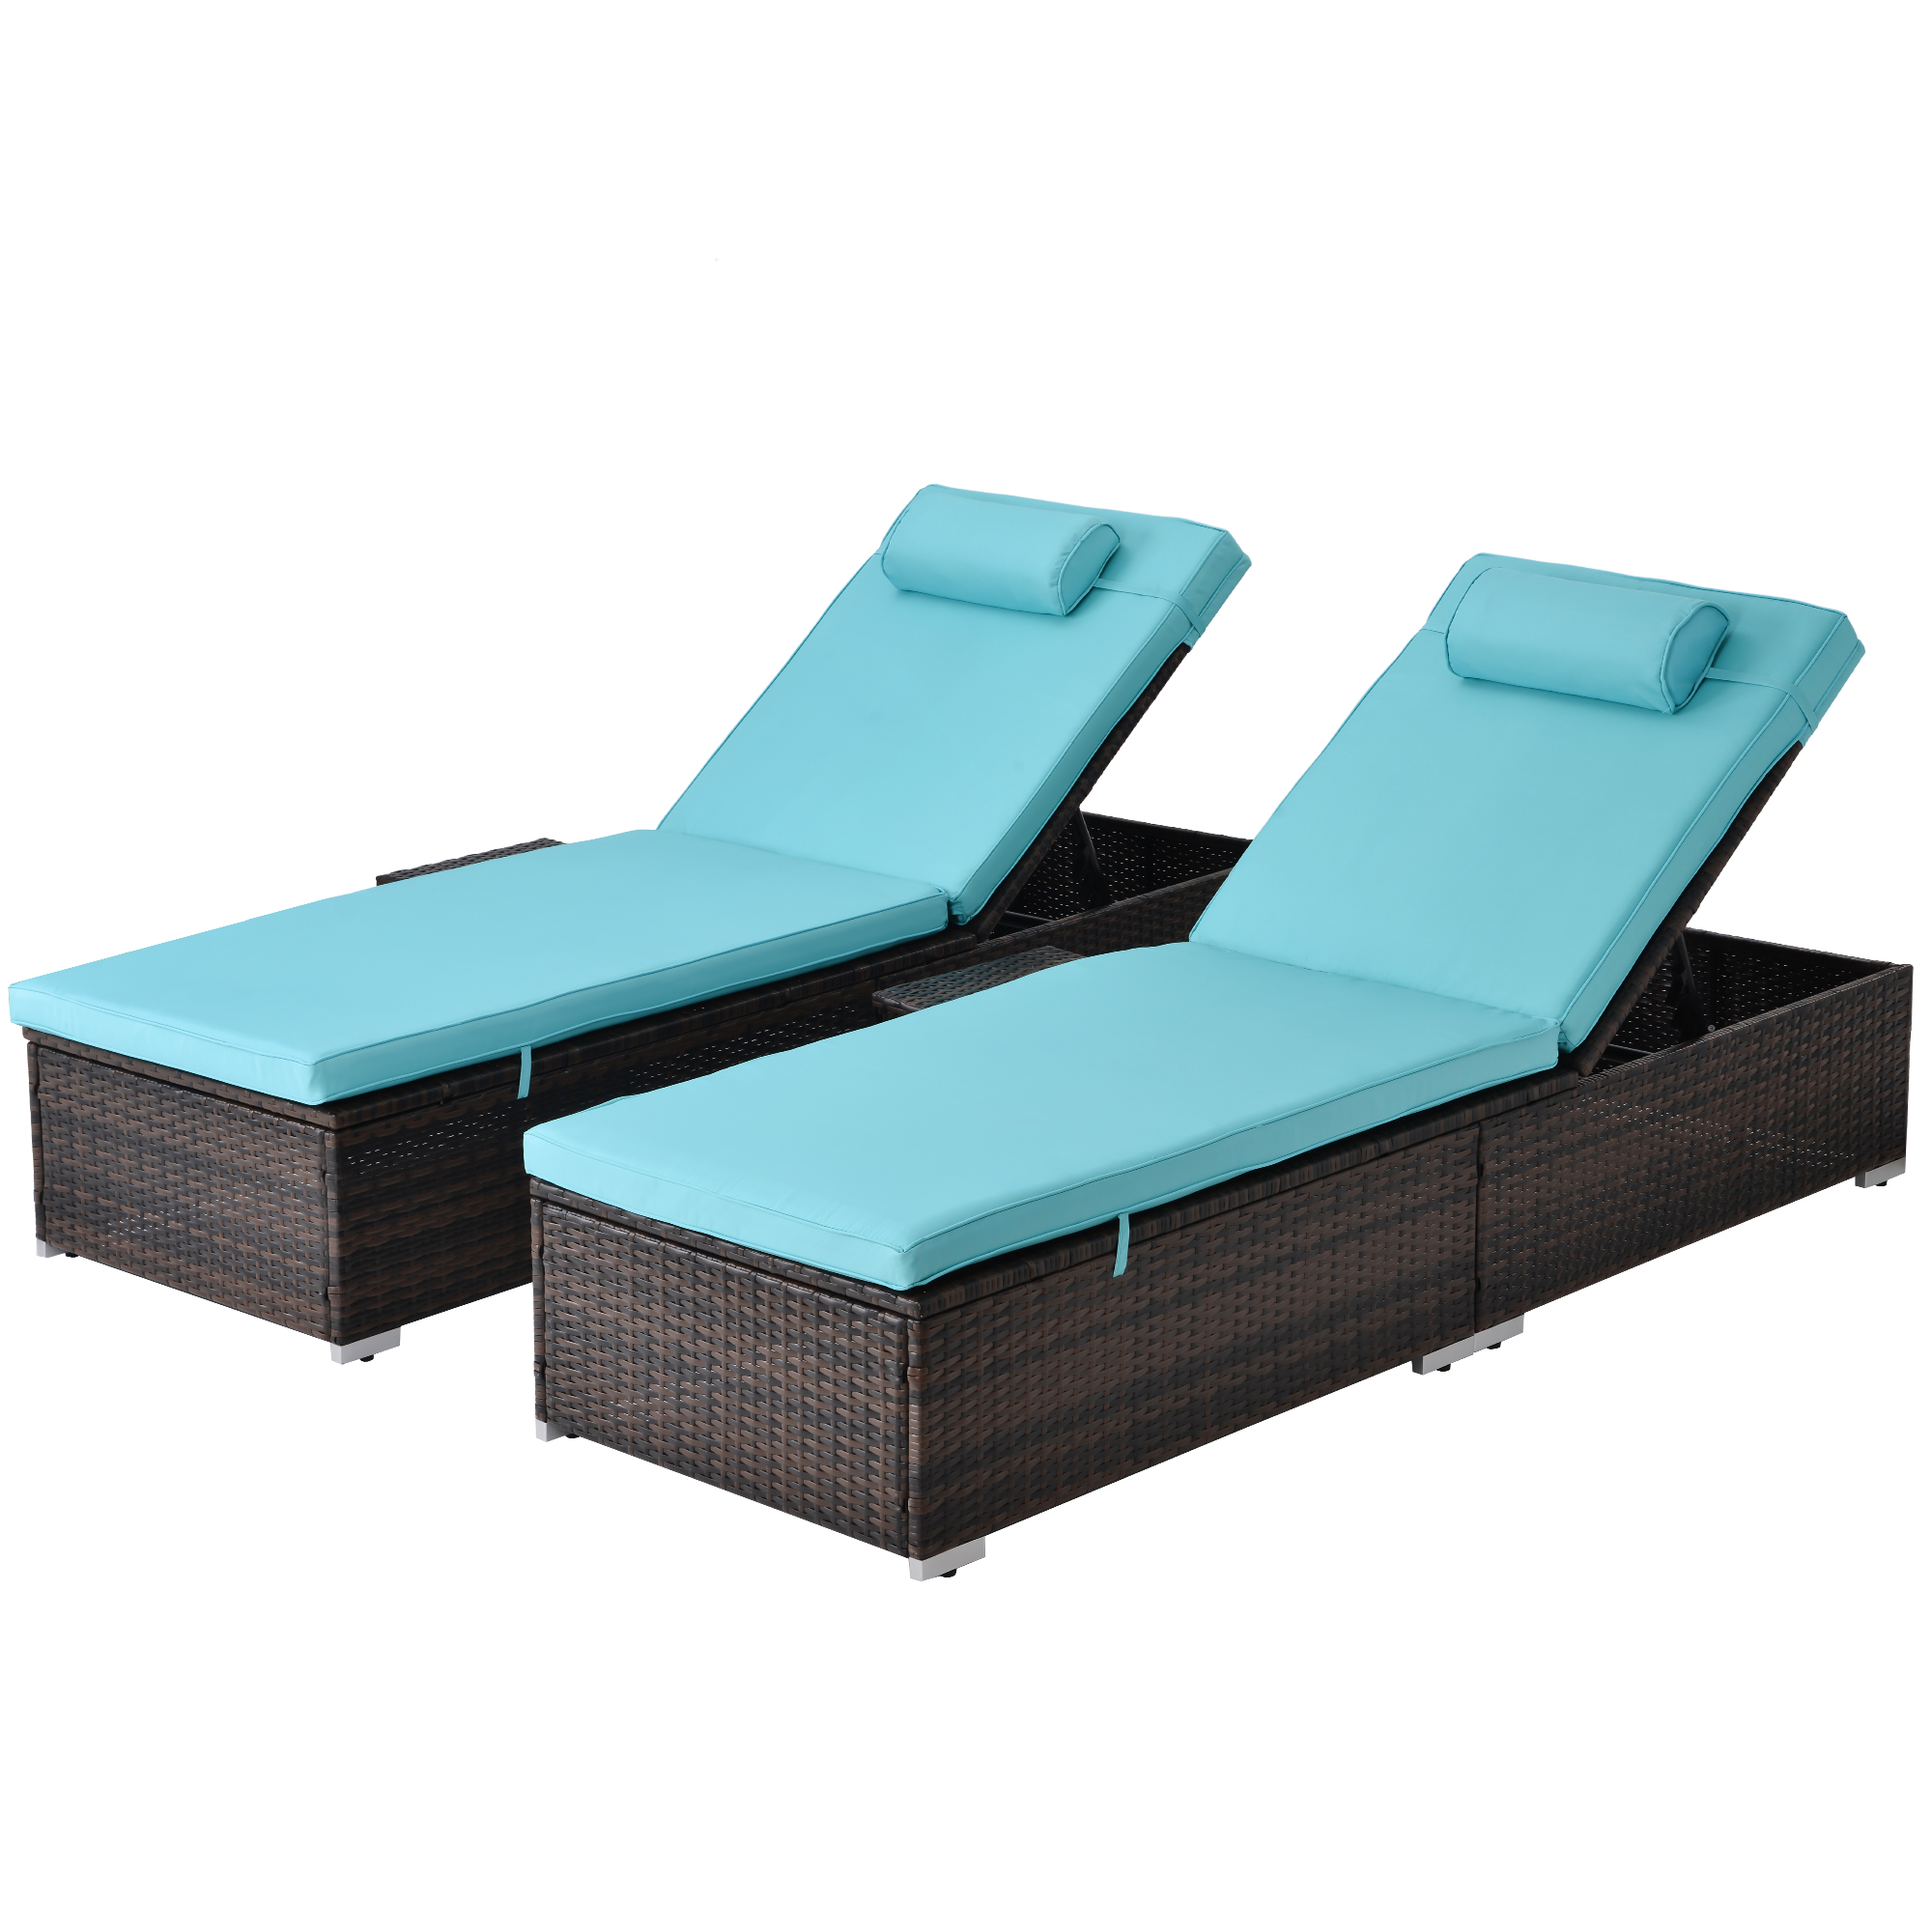 Outdoor Chaise Lounge Chairs, Patio Reclining Sun Lounger, Wicker Rattan Adjustable Lounge Chair with Side Table, Comfort Head Pillow, Reclining Chair for Poolside, Deck, Backyard, 2 Pack, Blue - image 5 of 10